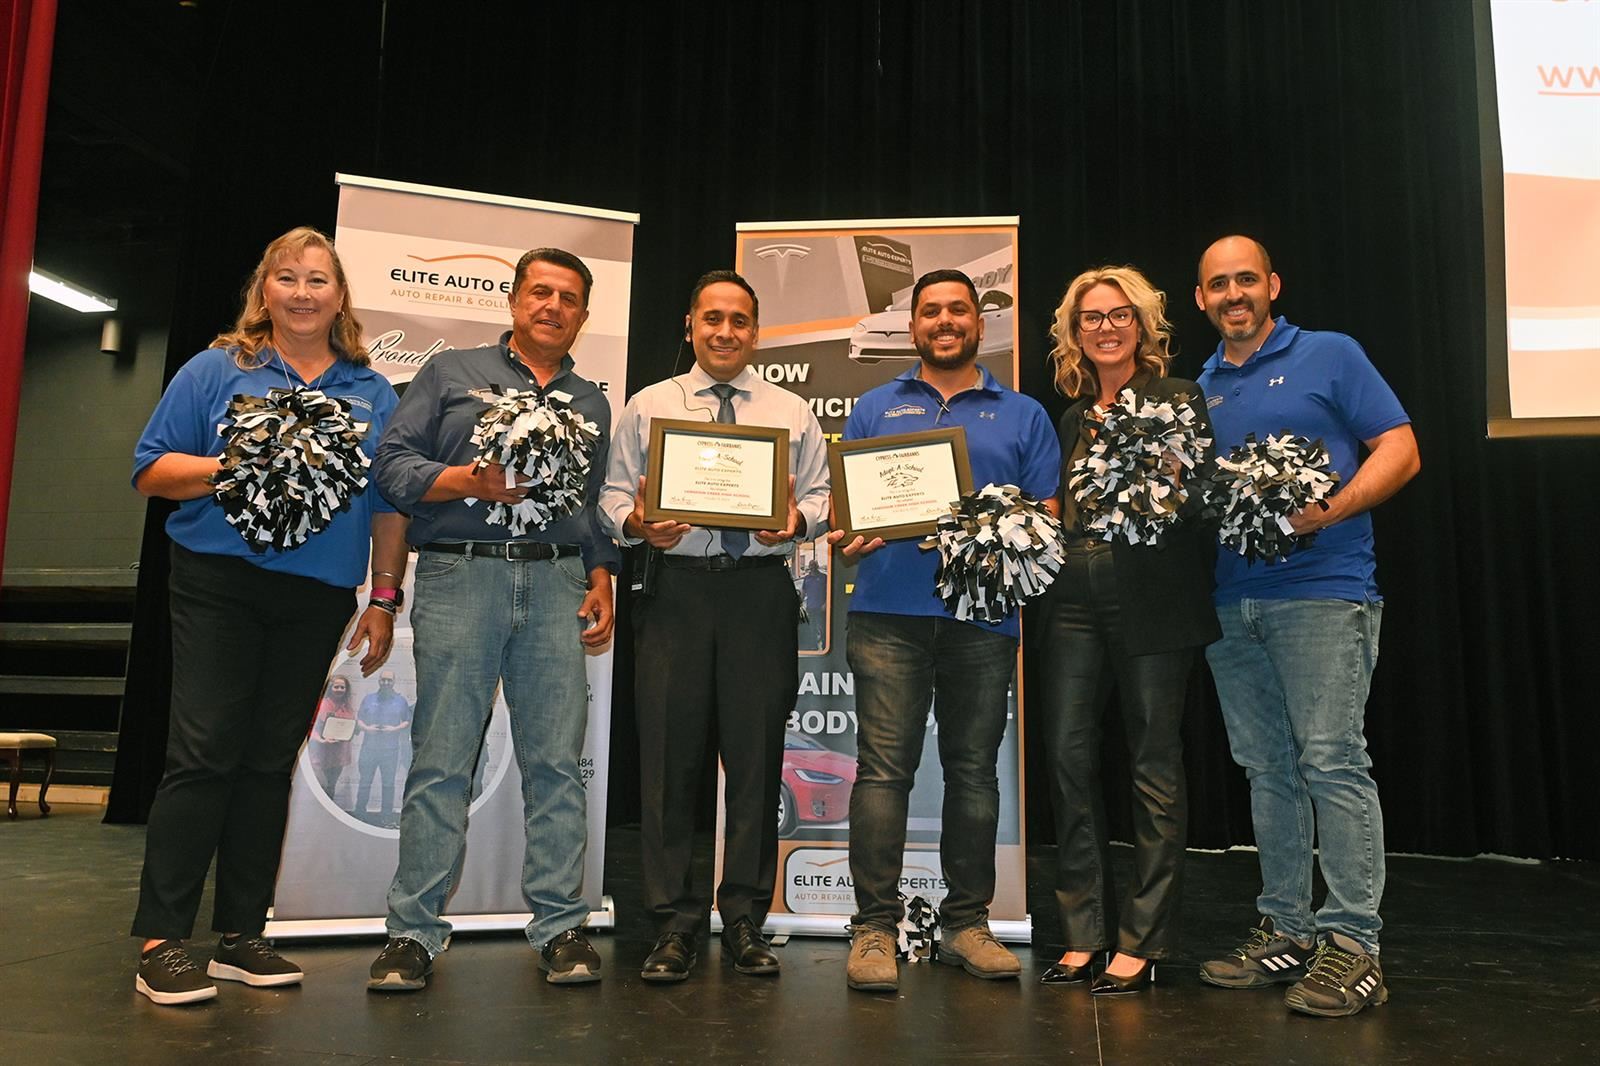 Representatives from Elite Auto Experts join Langham Creek High School and CFISD personnel for a photo.